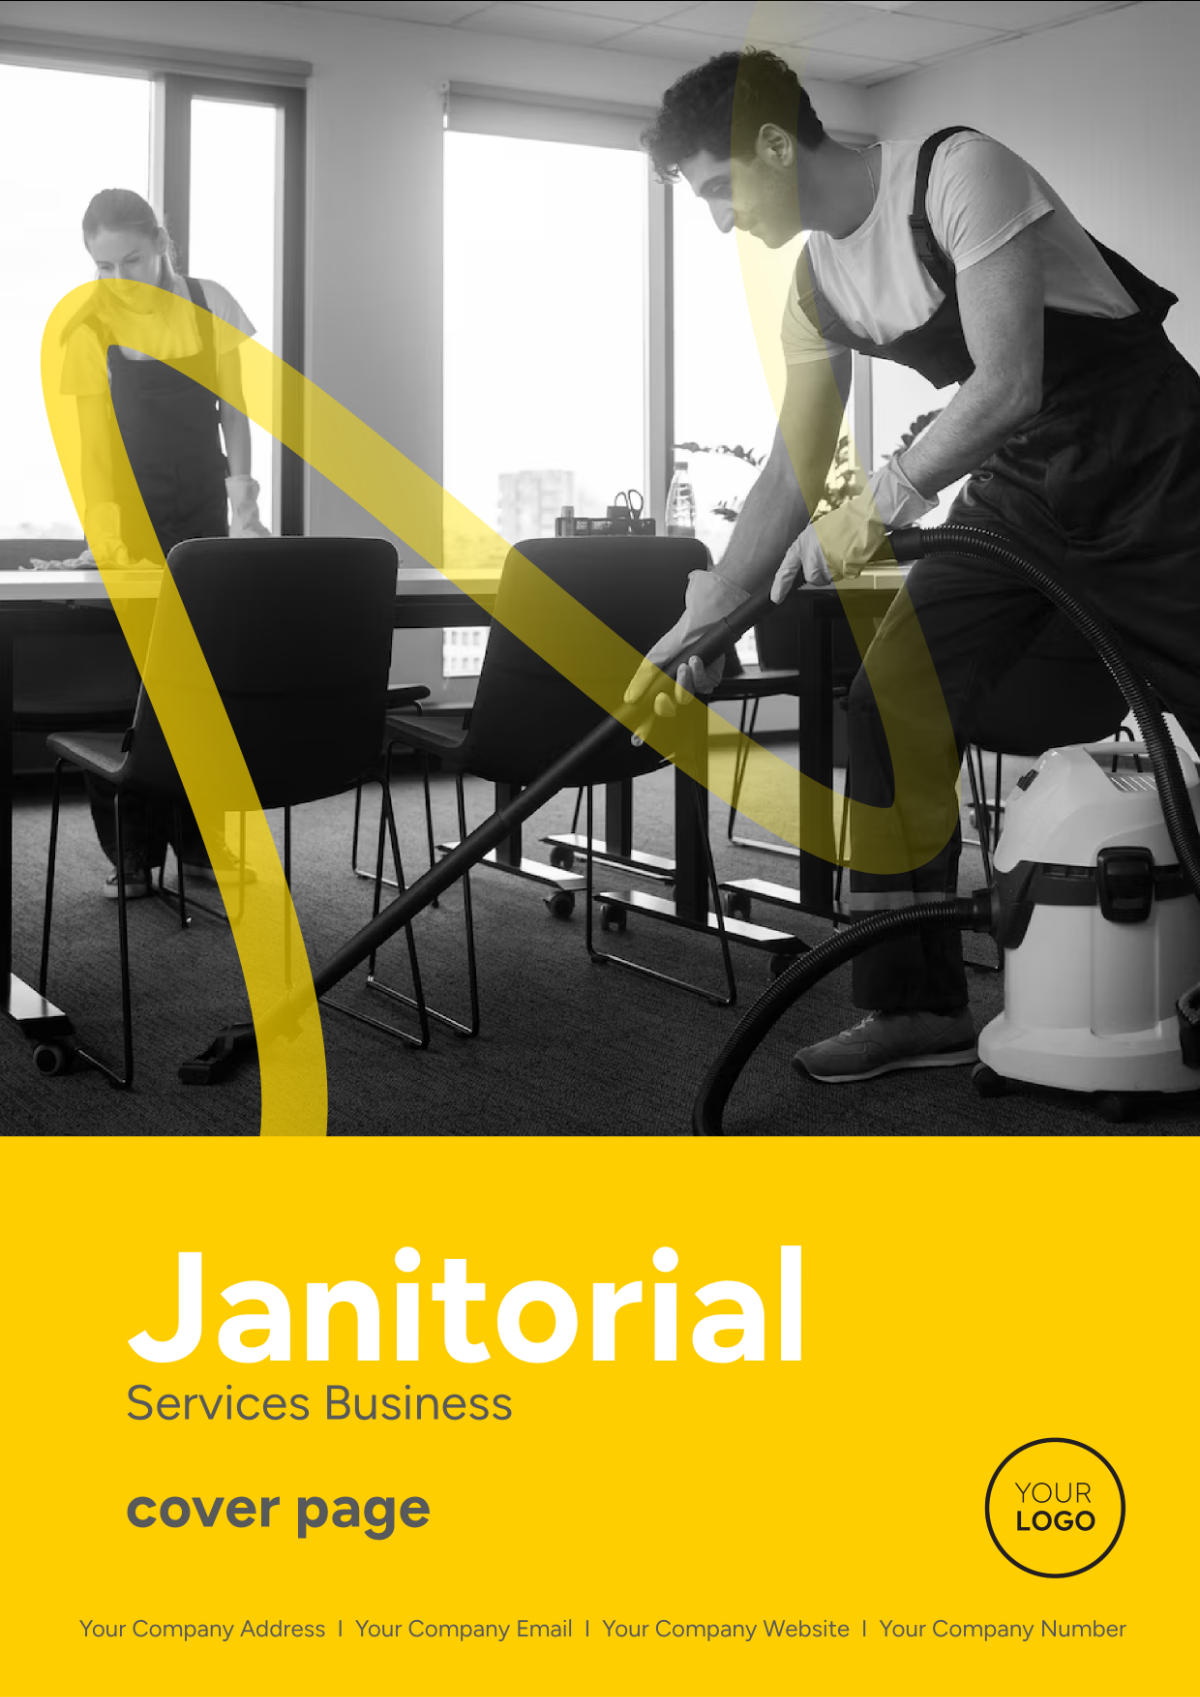 Janitorial Services Business Cover Page